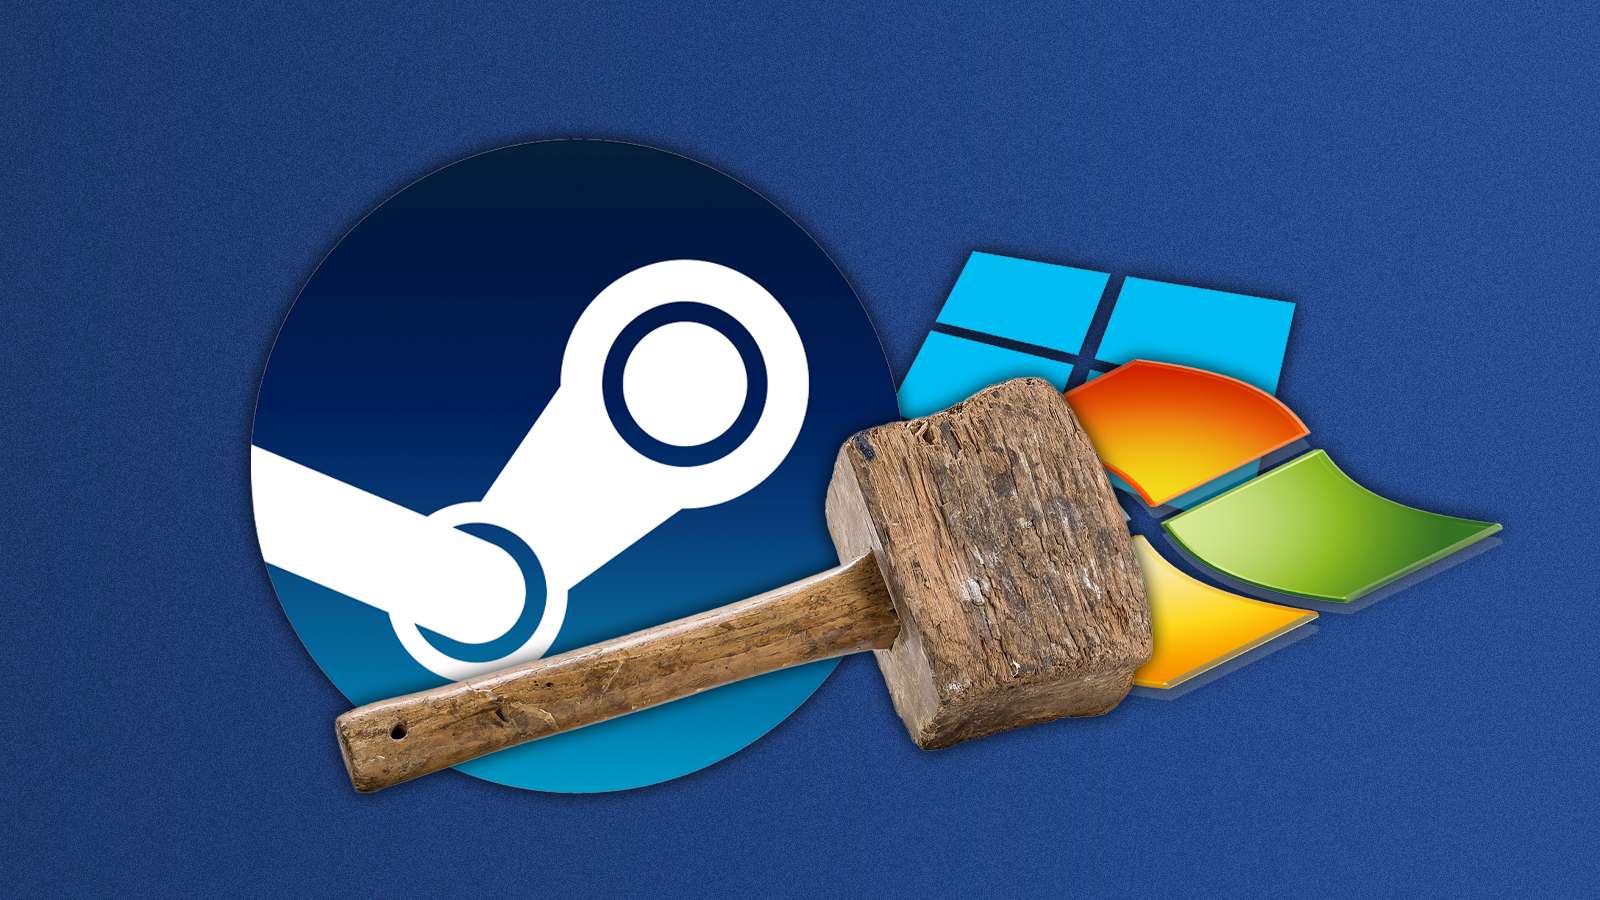 Steam holding a hammer with Windows 7 and 8.1 logos behind it